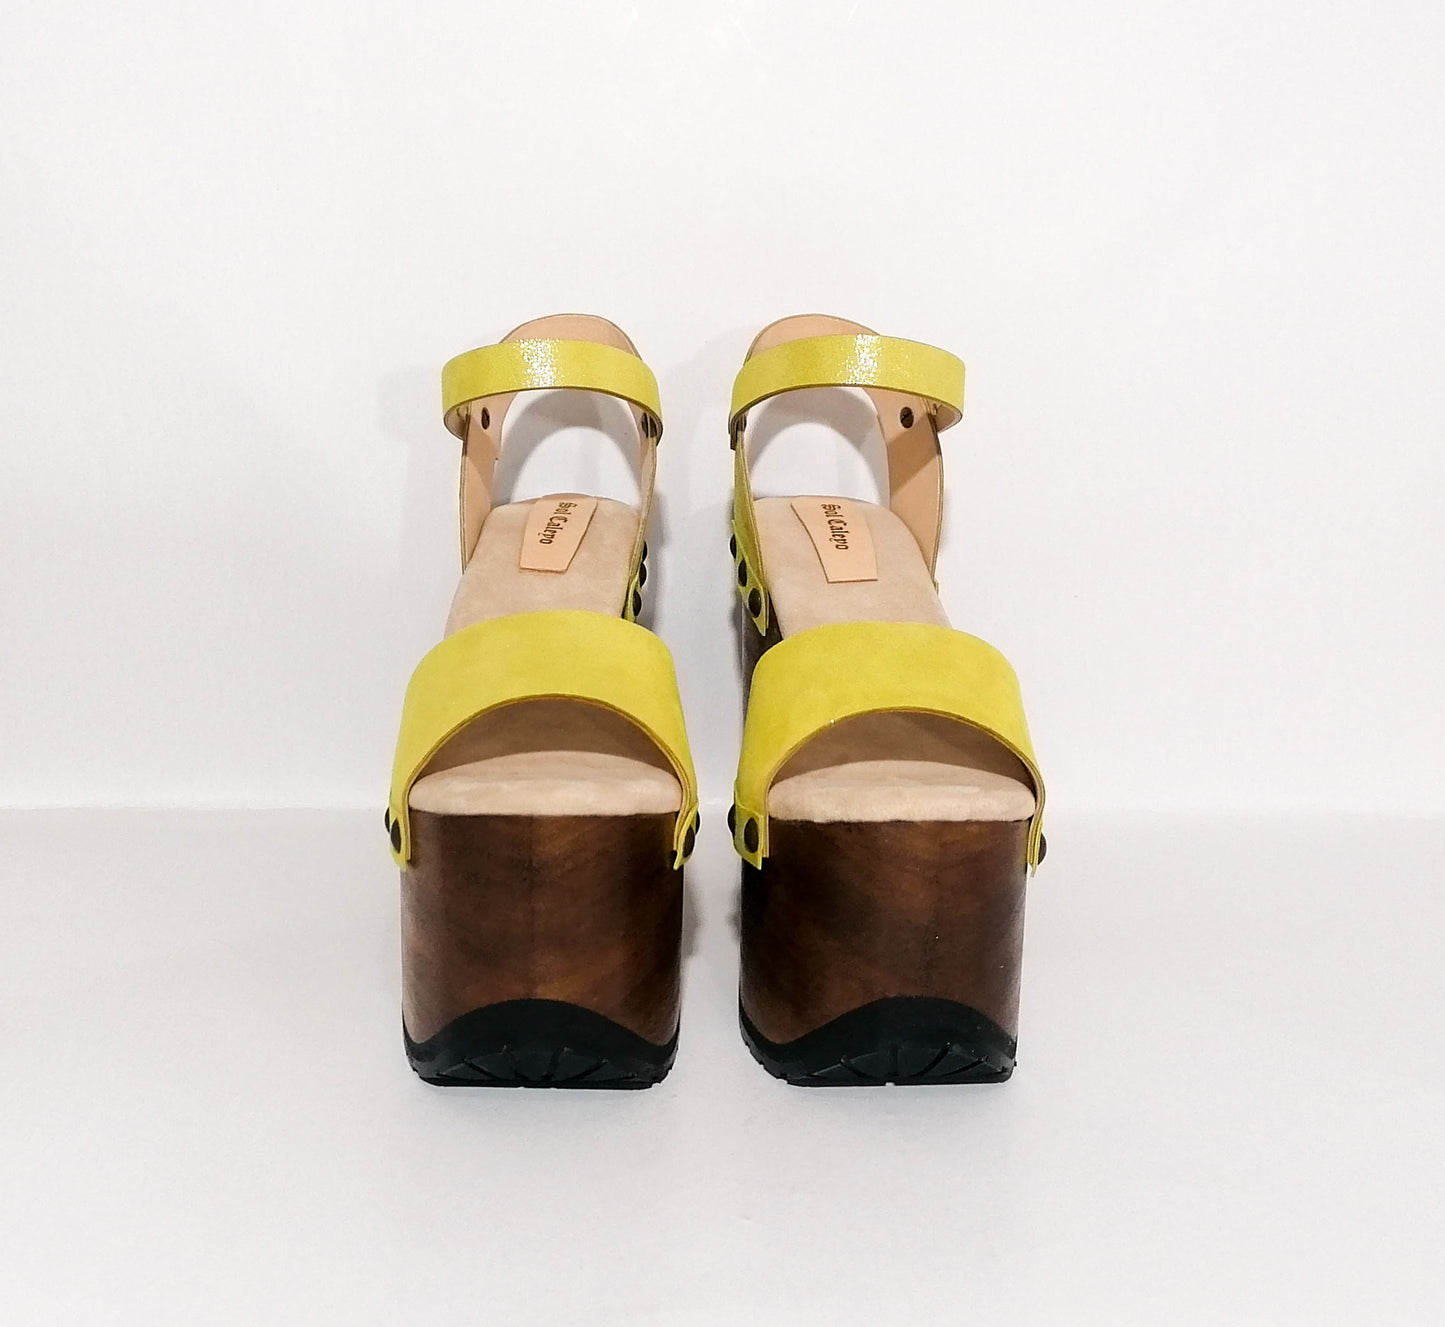 Vintage style yellow platform clog sandals. Super high wooden heel sandal. Vintage 70's style platform sandal. Sizes 34 to 47. High quality leather shoes handmade by sol Caleyo. Sustainable fashion.